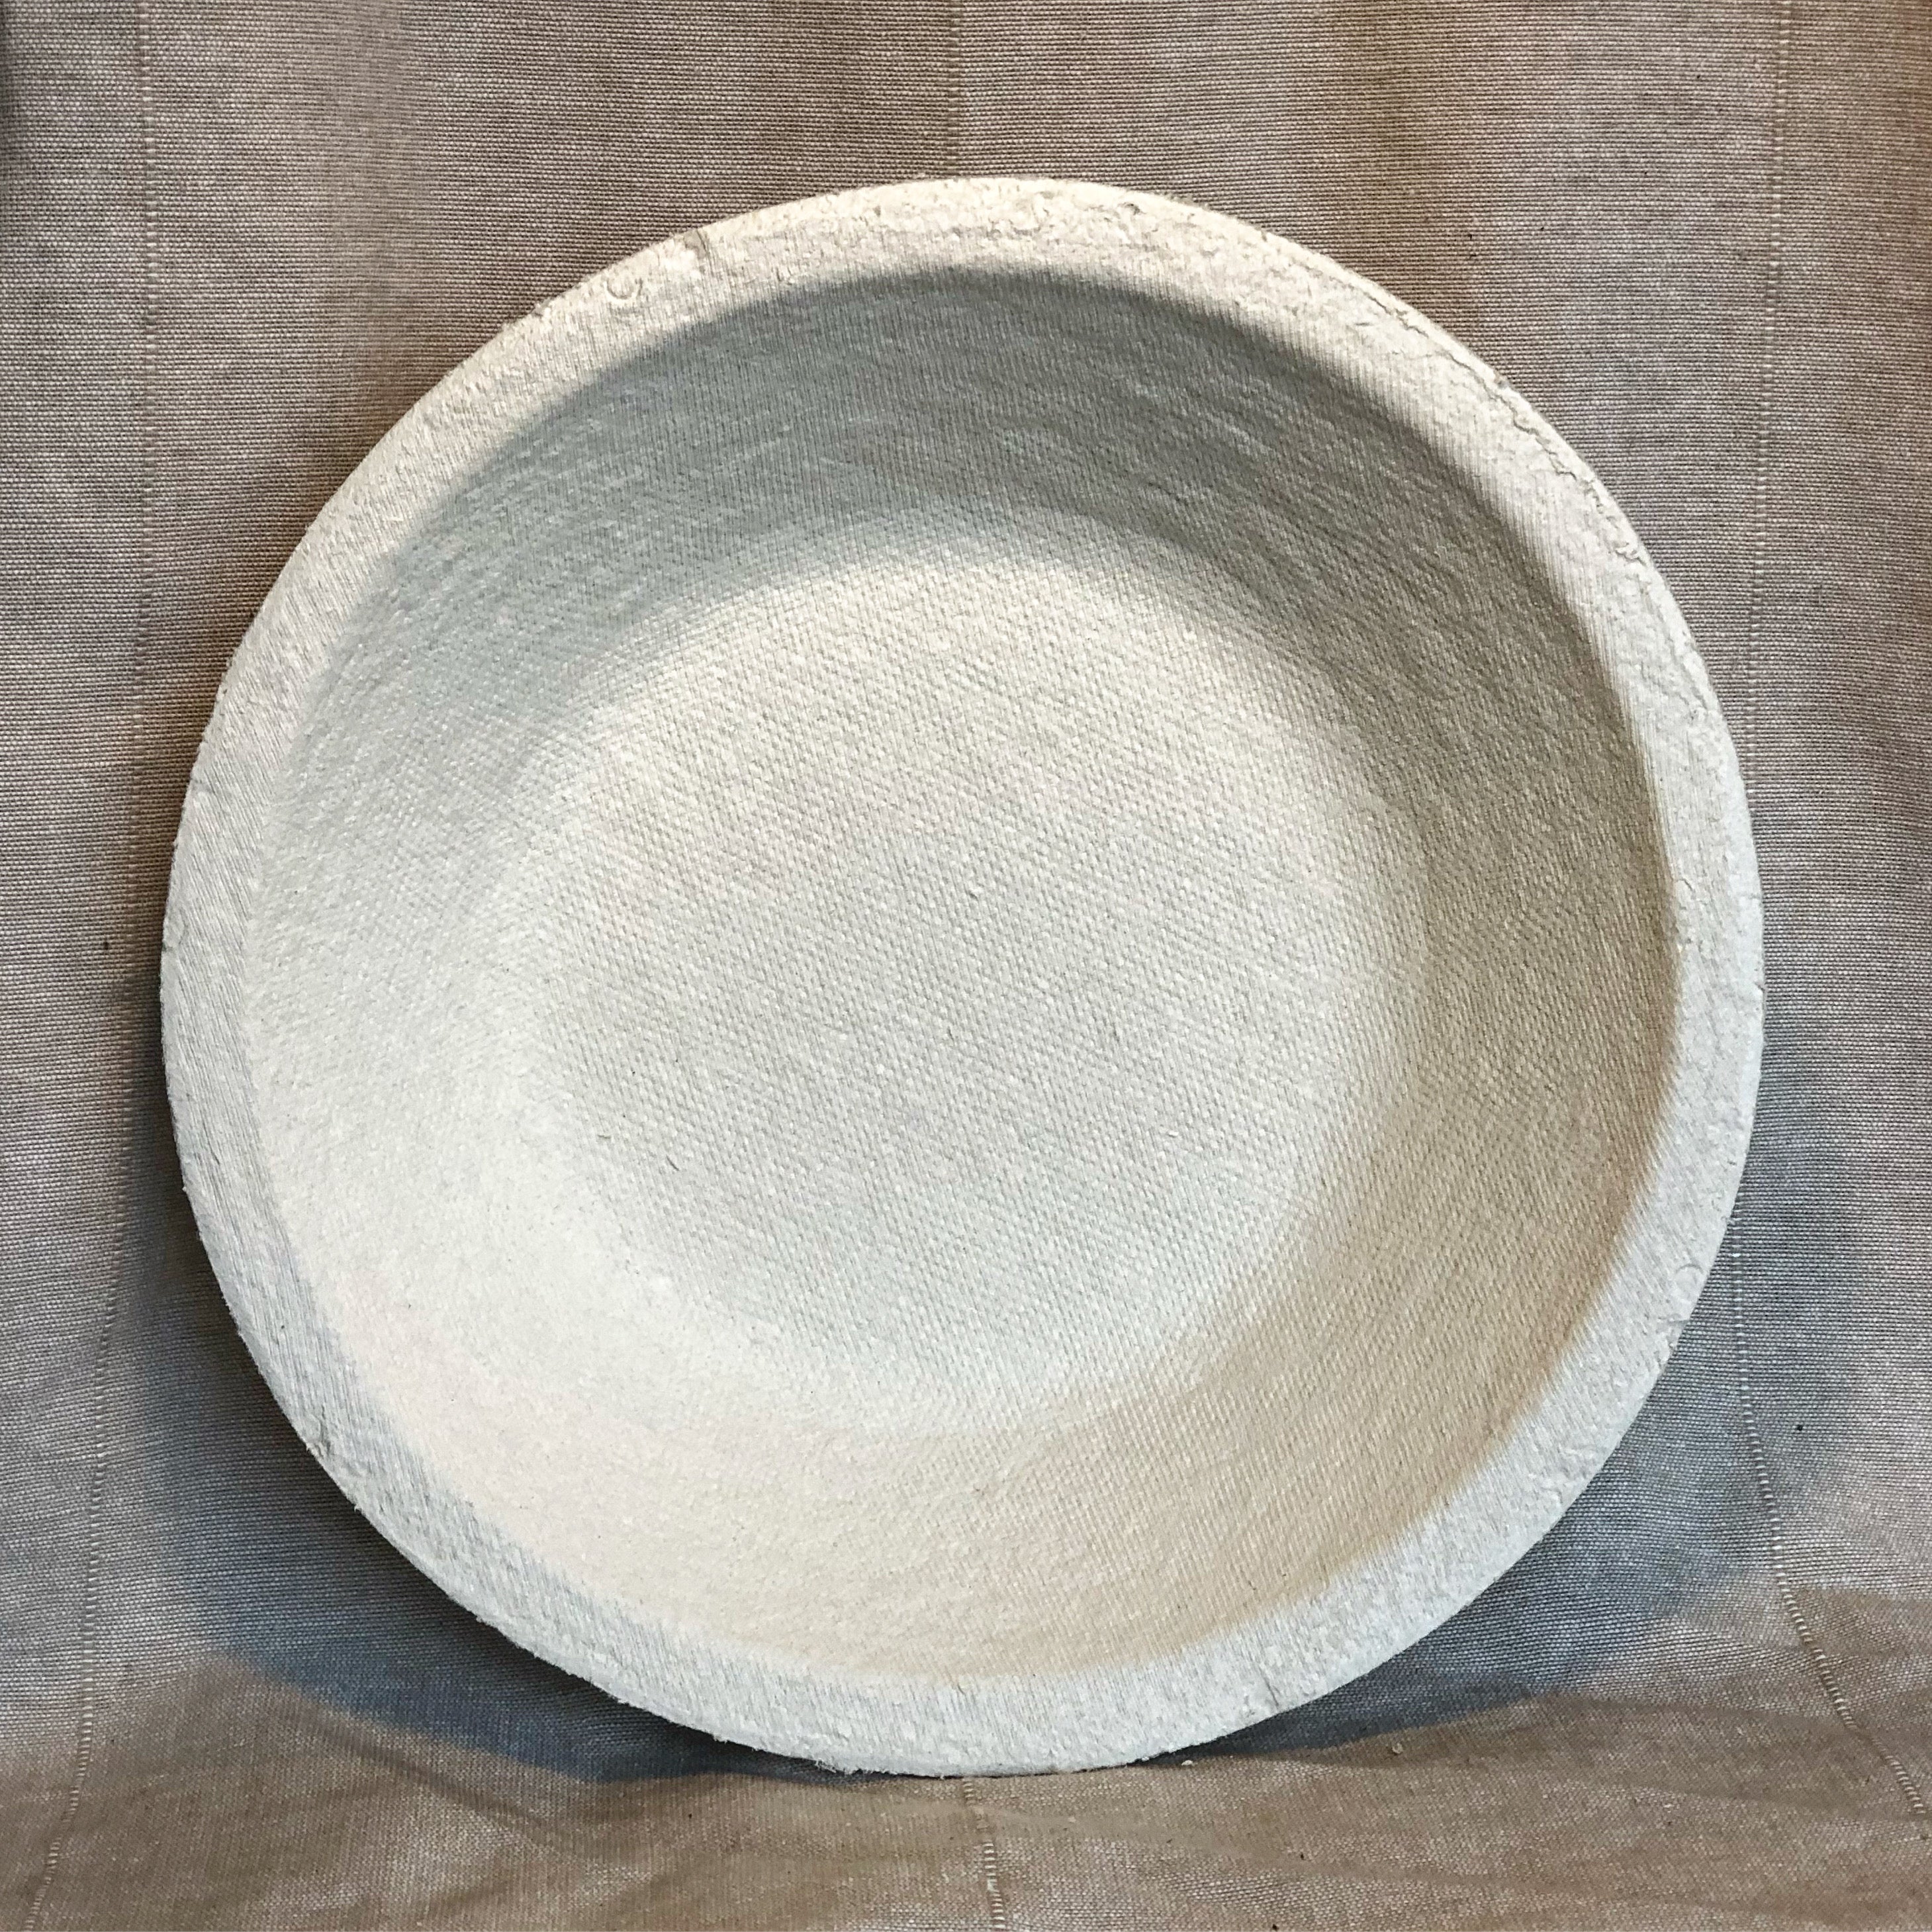 Proofing Basket (Round Smooth)